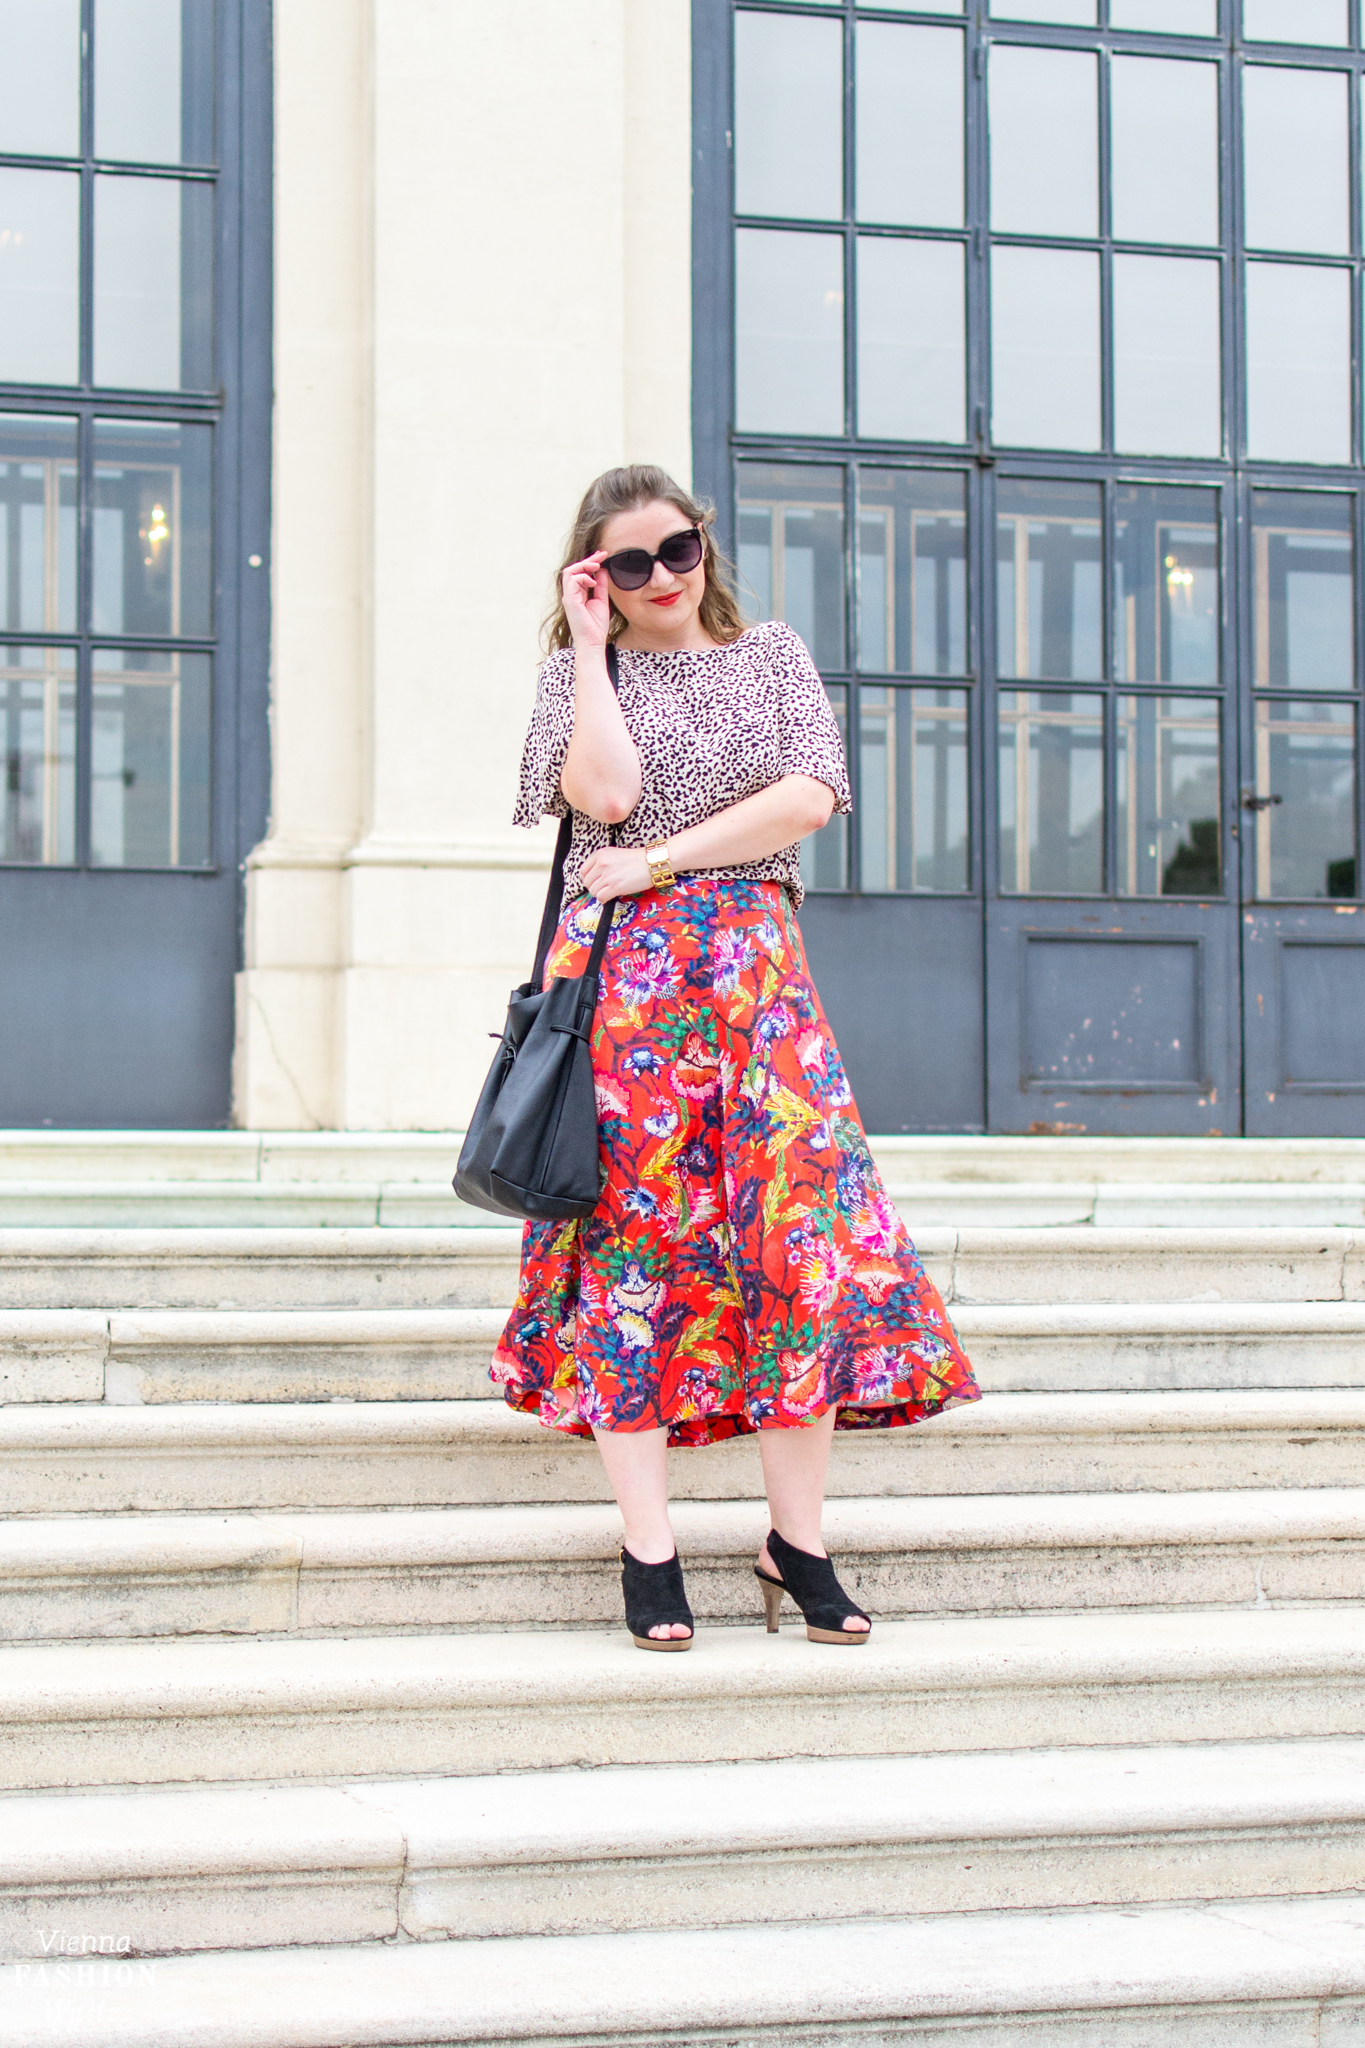 Blumenprints im Trend & Styling Tipps | Print Mix Outfit | Blogger Style, Fashion Streetstyle, Wien Belvedere